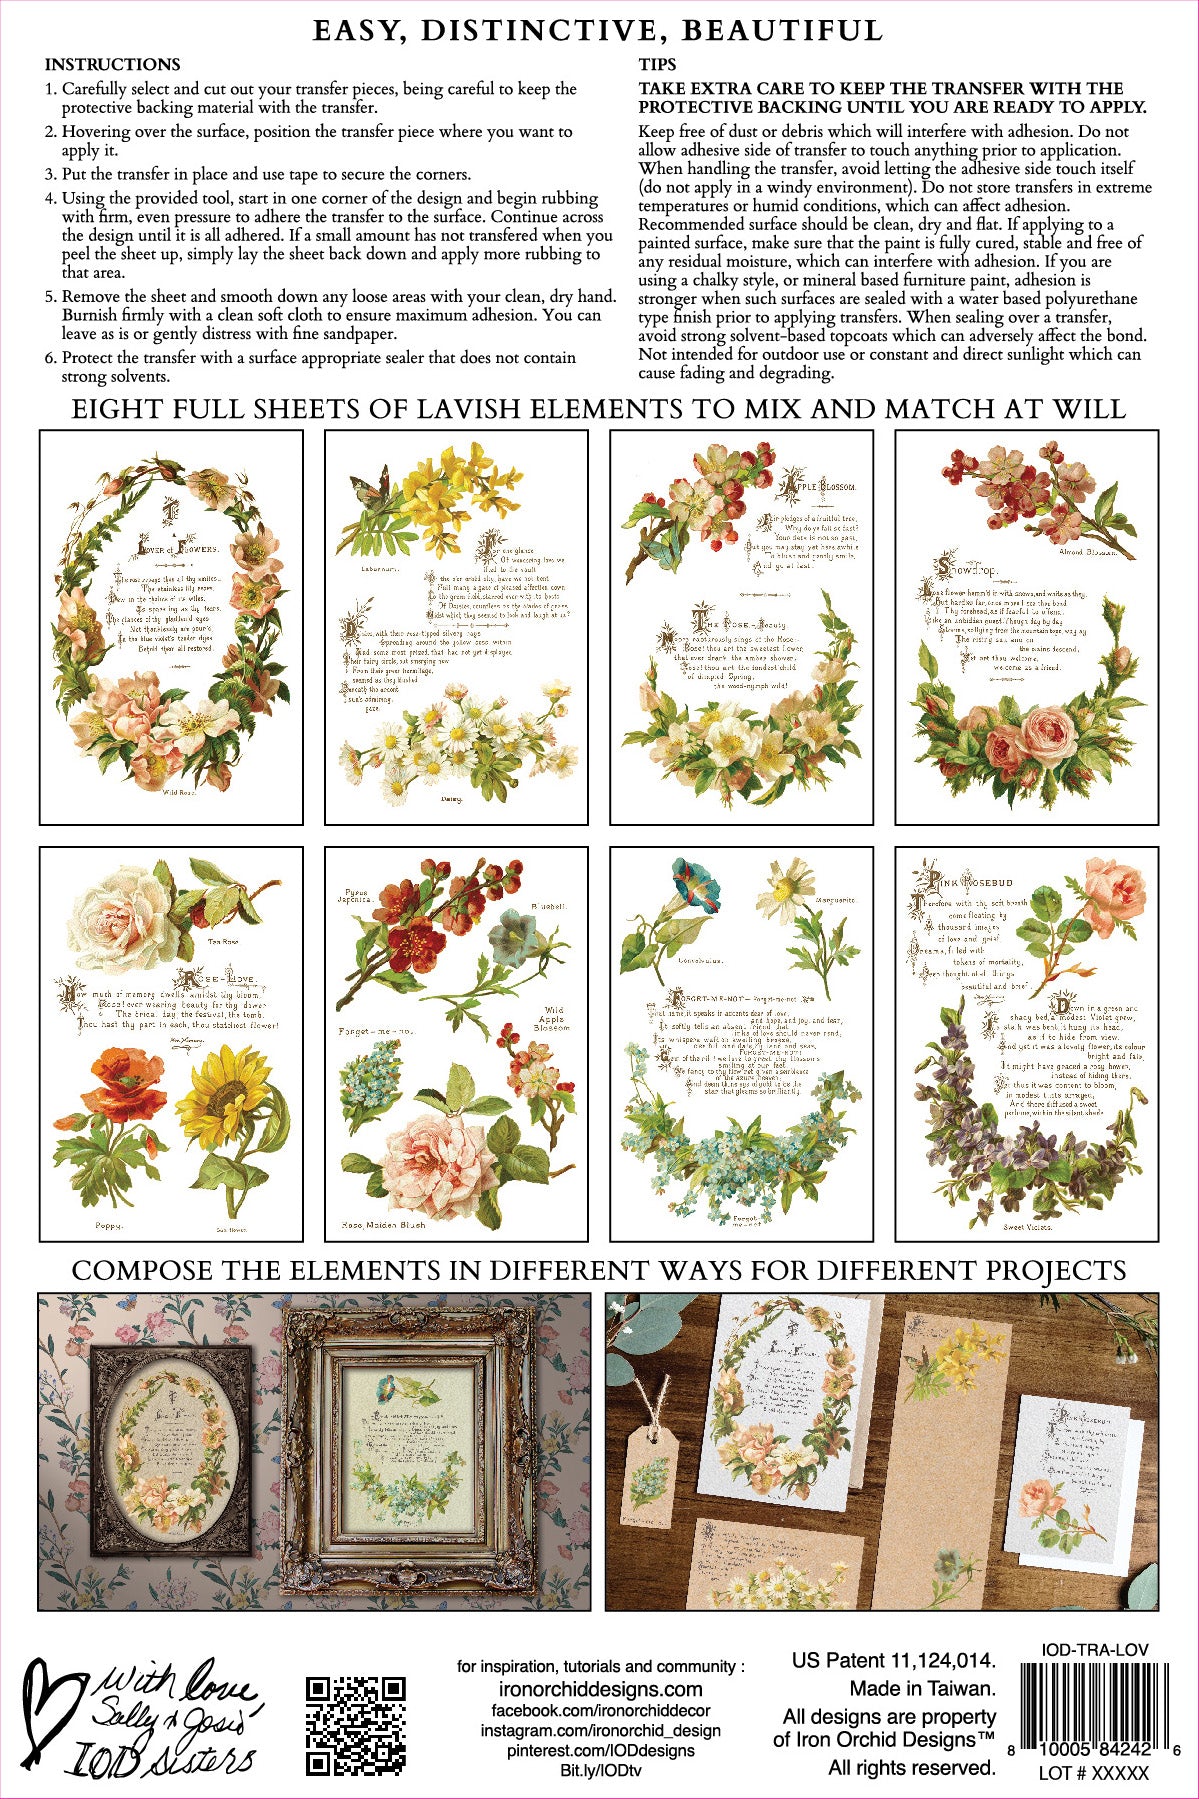 IOD Lover of Flowers Transfer -  BEST SELLER - shipping to you March 20th